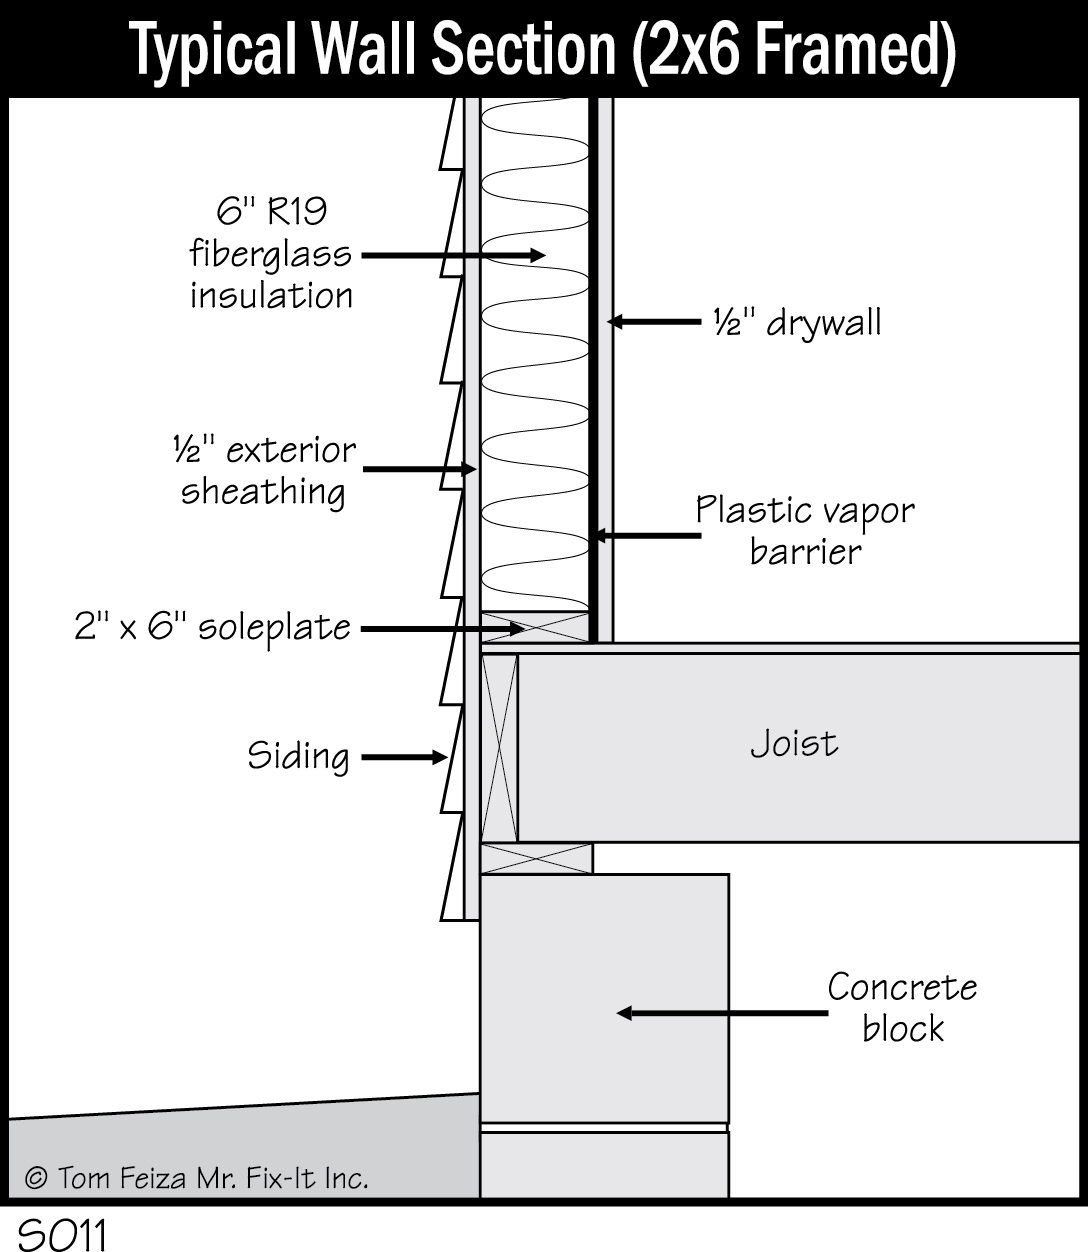 S011 - Typical Wall Section (2x6 Framed)